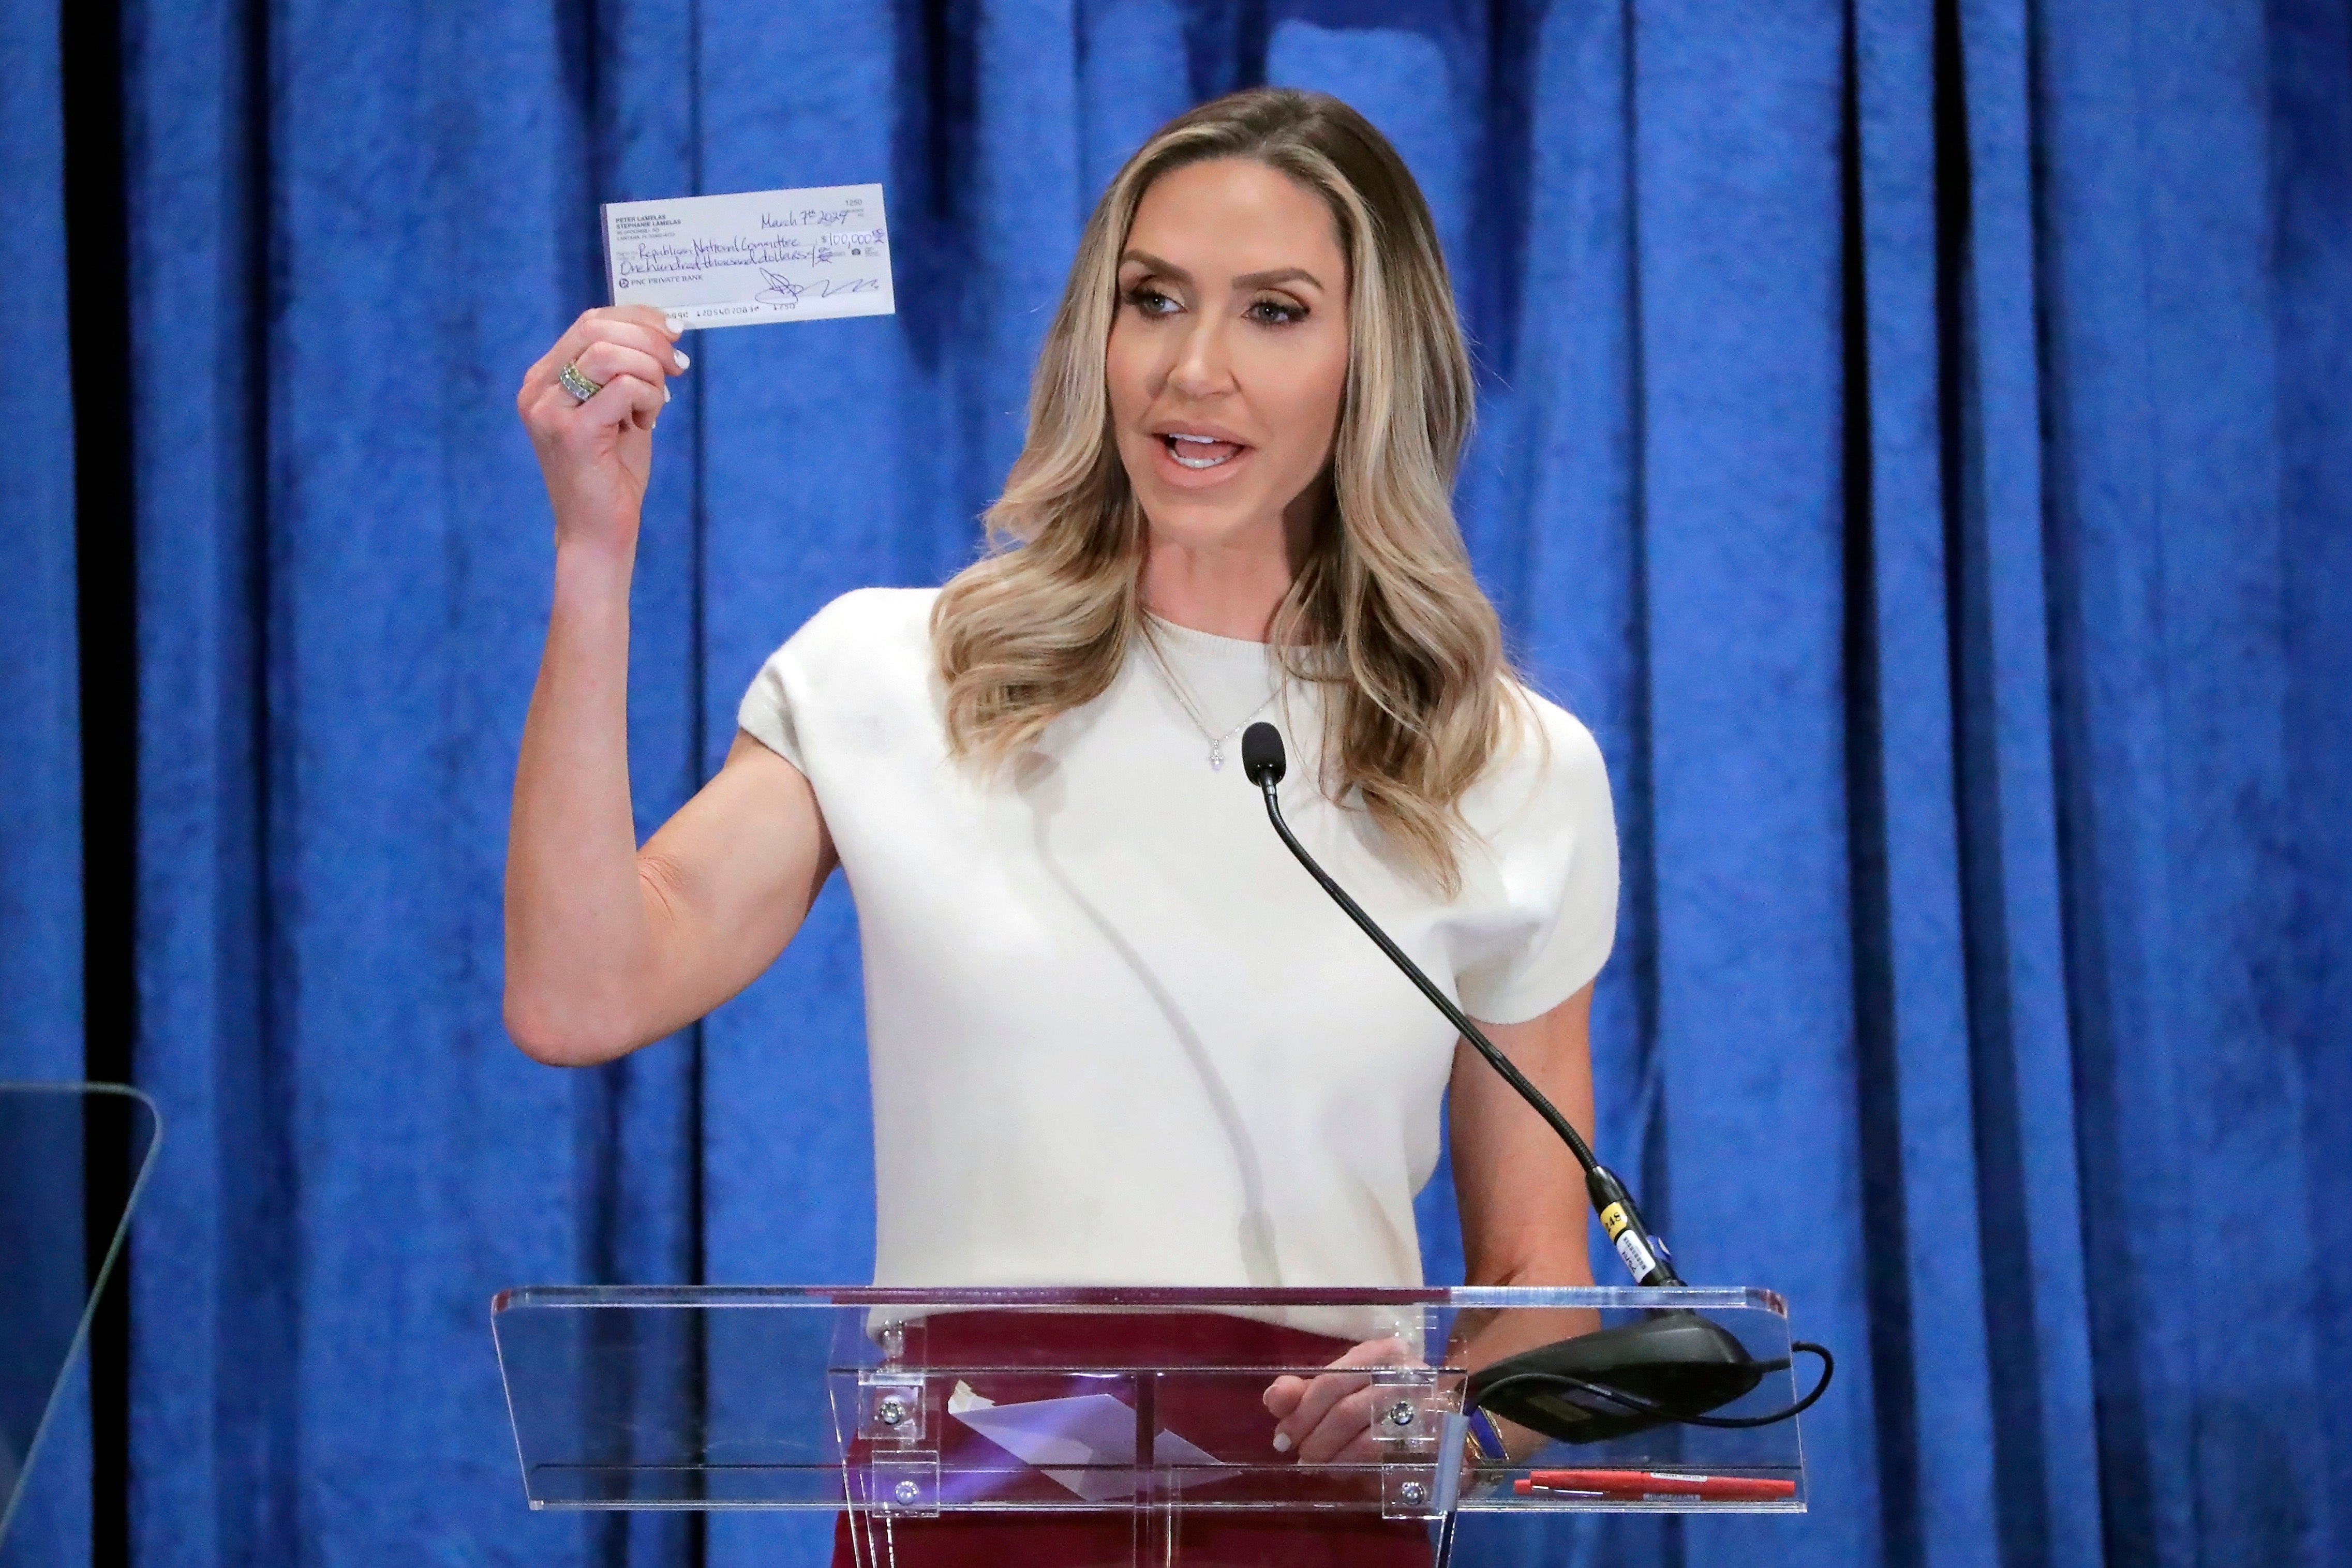 Lara Trump, the newly elected co-chair of the Republican National Committee, holds up a donation check as she gives an address during the general session of the RNC Spring Meeting on 8 March in Houston, Texas.